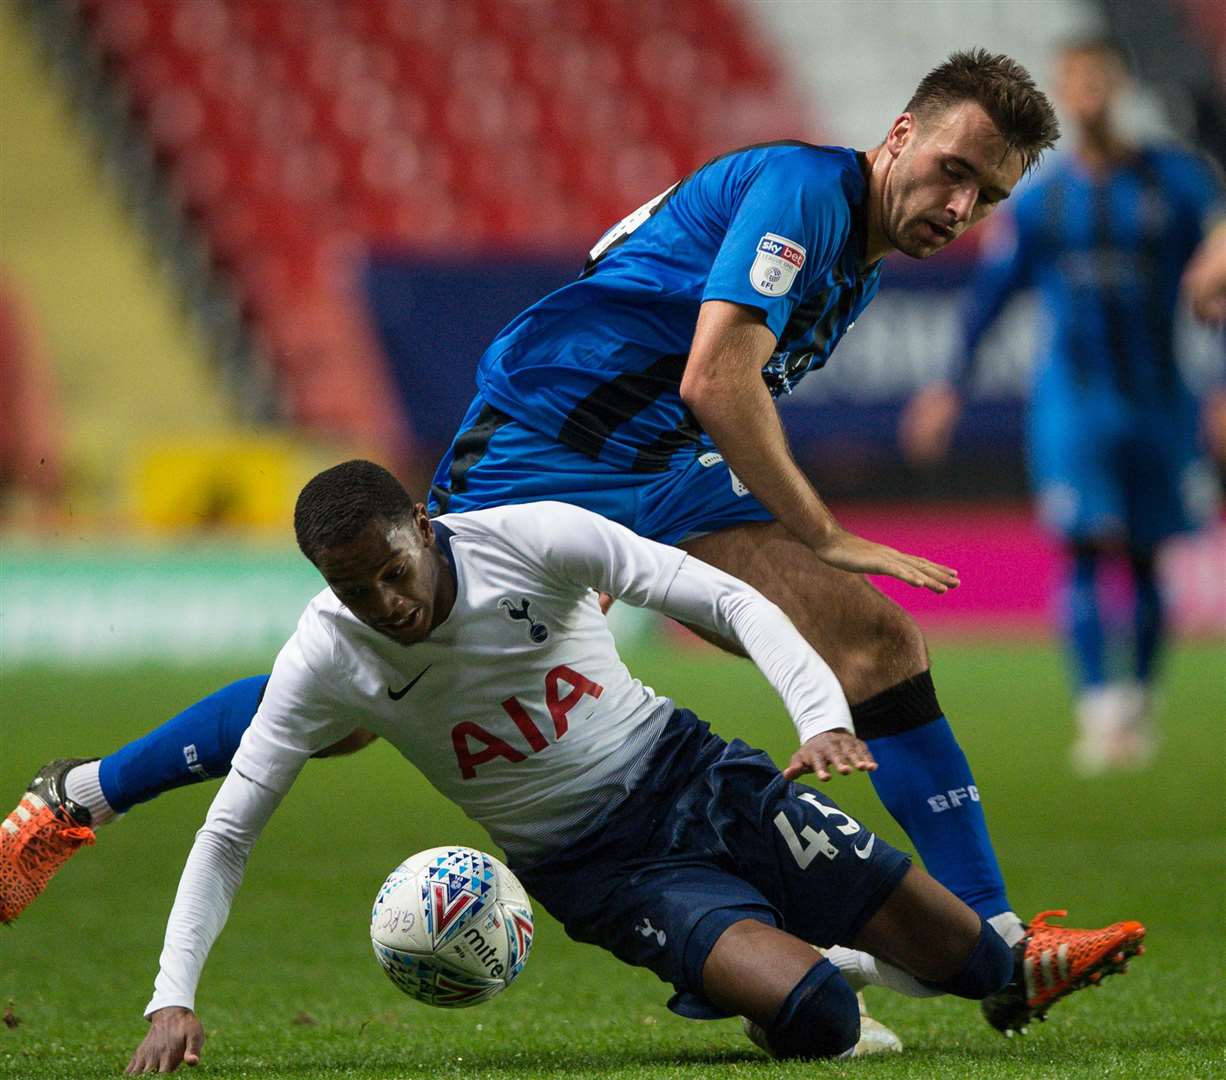 Gillingham's Josh Rees takes on Tottenham's Jaden Brown in the Checkatrade Trophy Picture: Ady Kerry